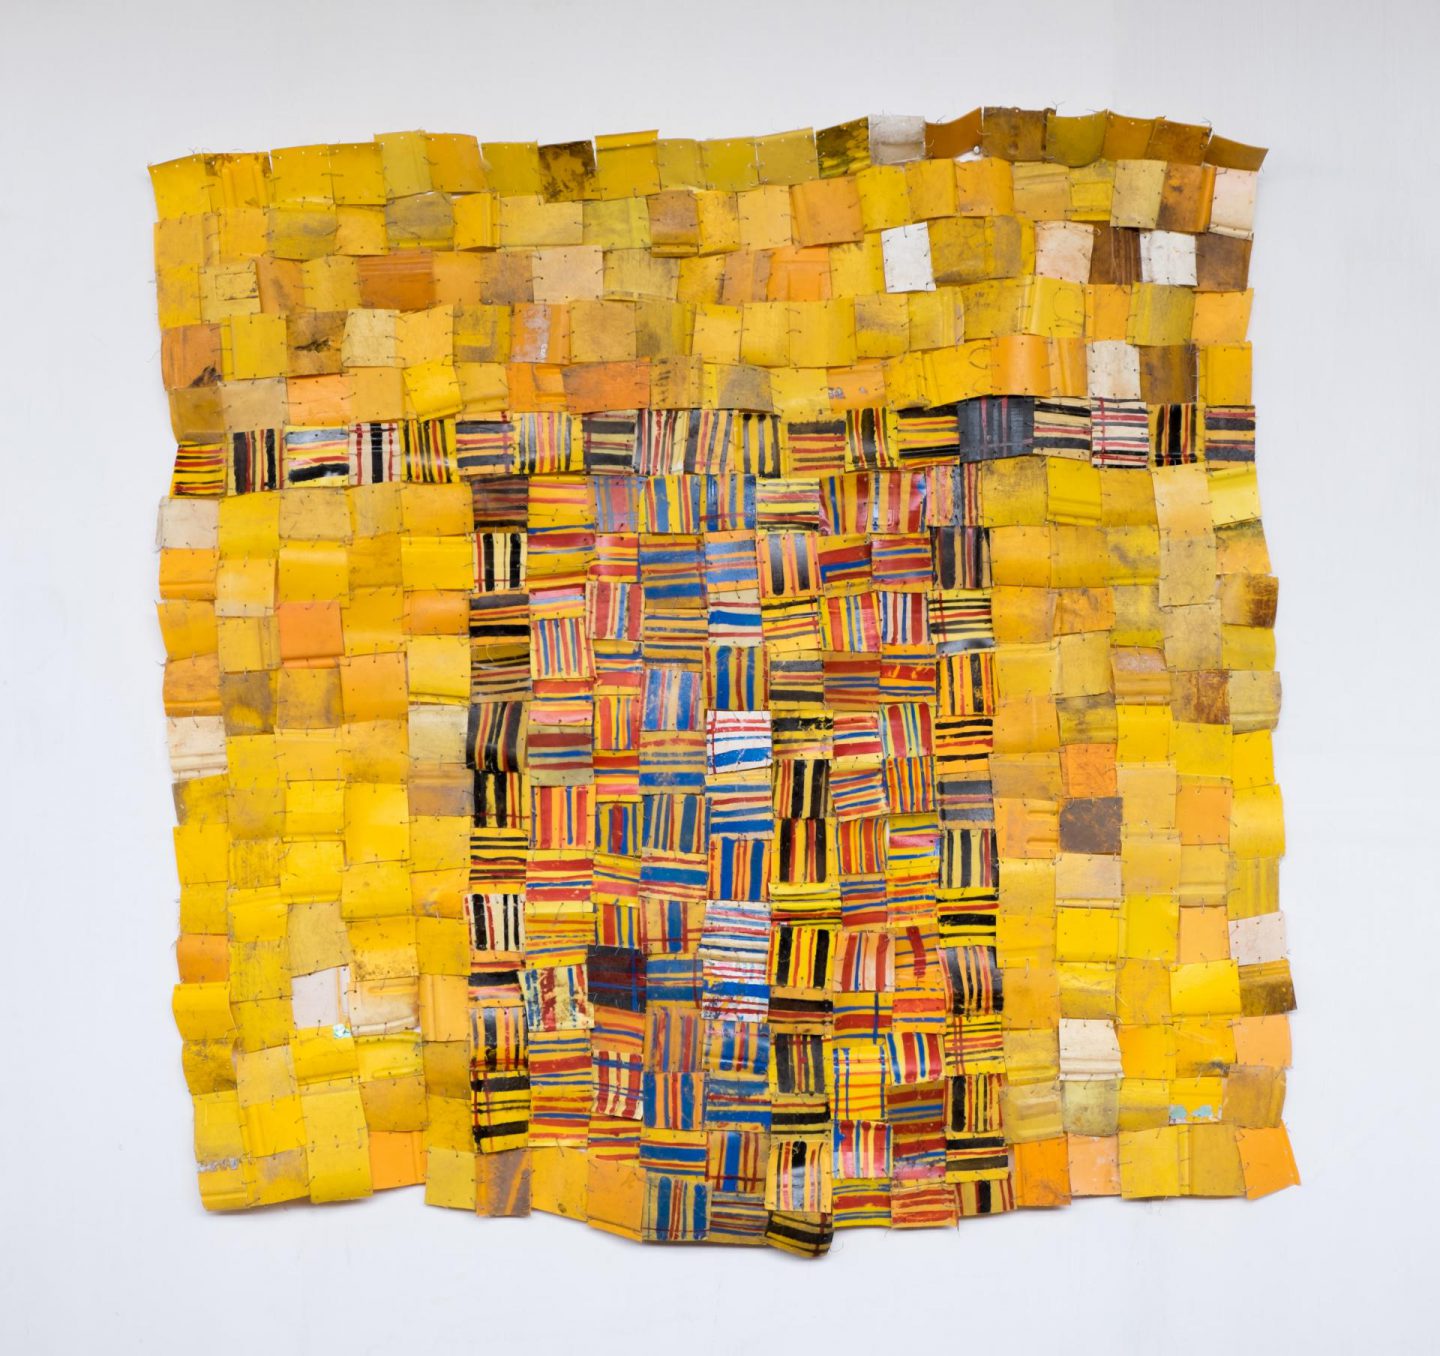 serge-attukwei-clottey-voices-demanding-2016-plastics-wire-and-oil-paint-64x-64-courtesy-the-artist-and-gallery-1957